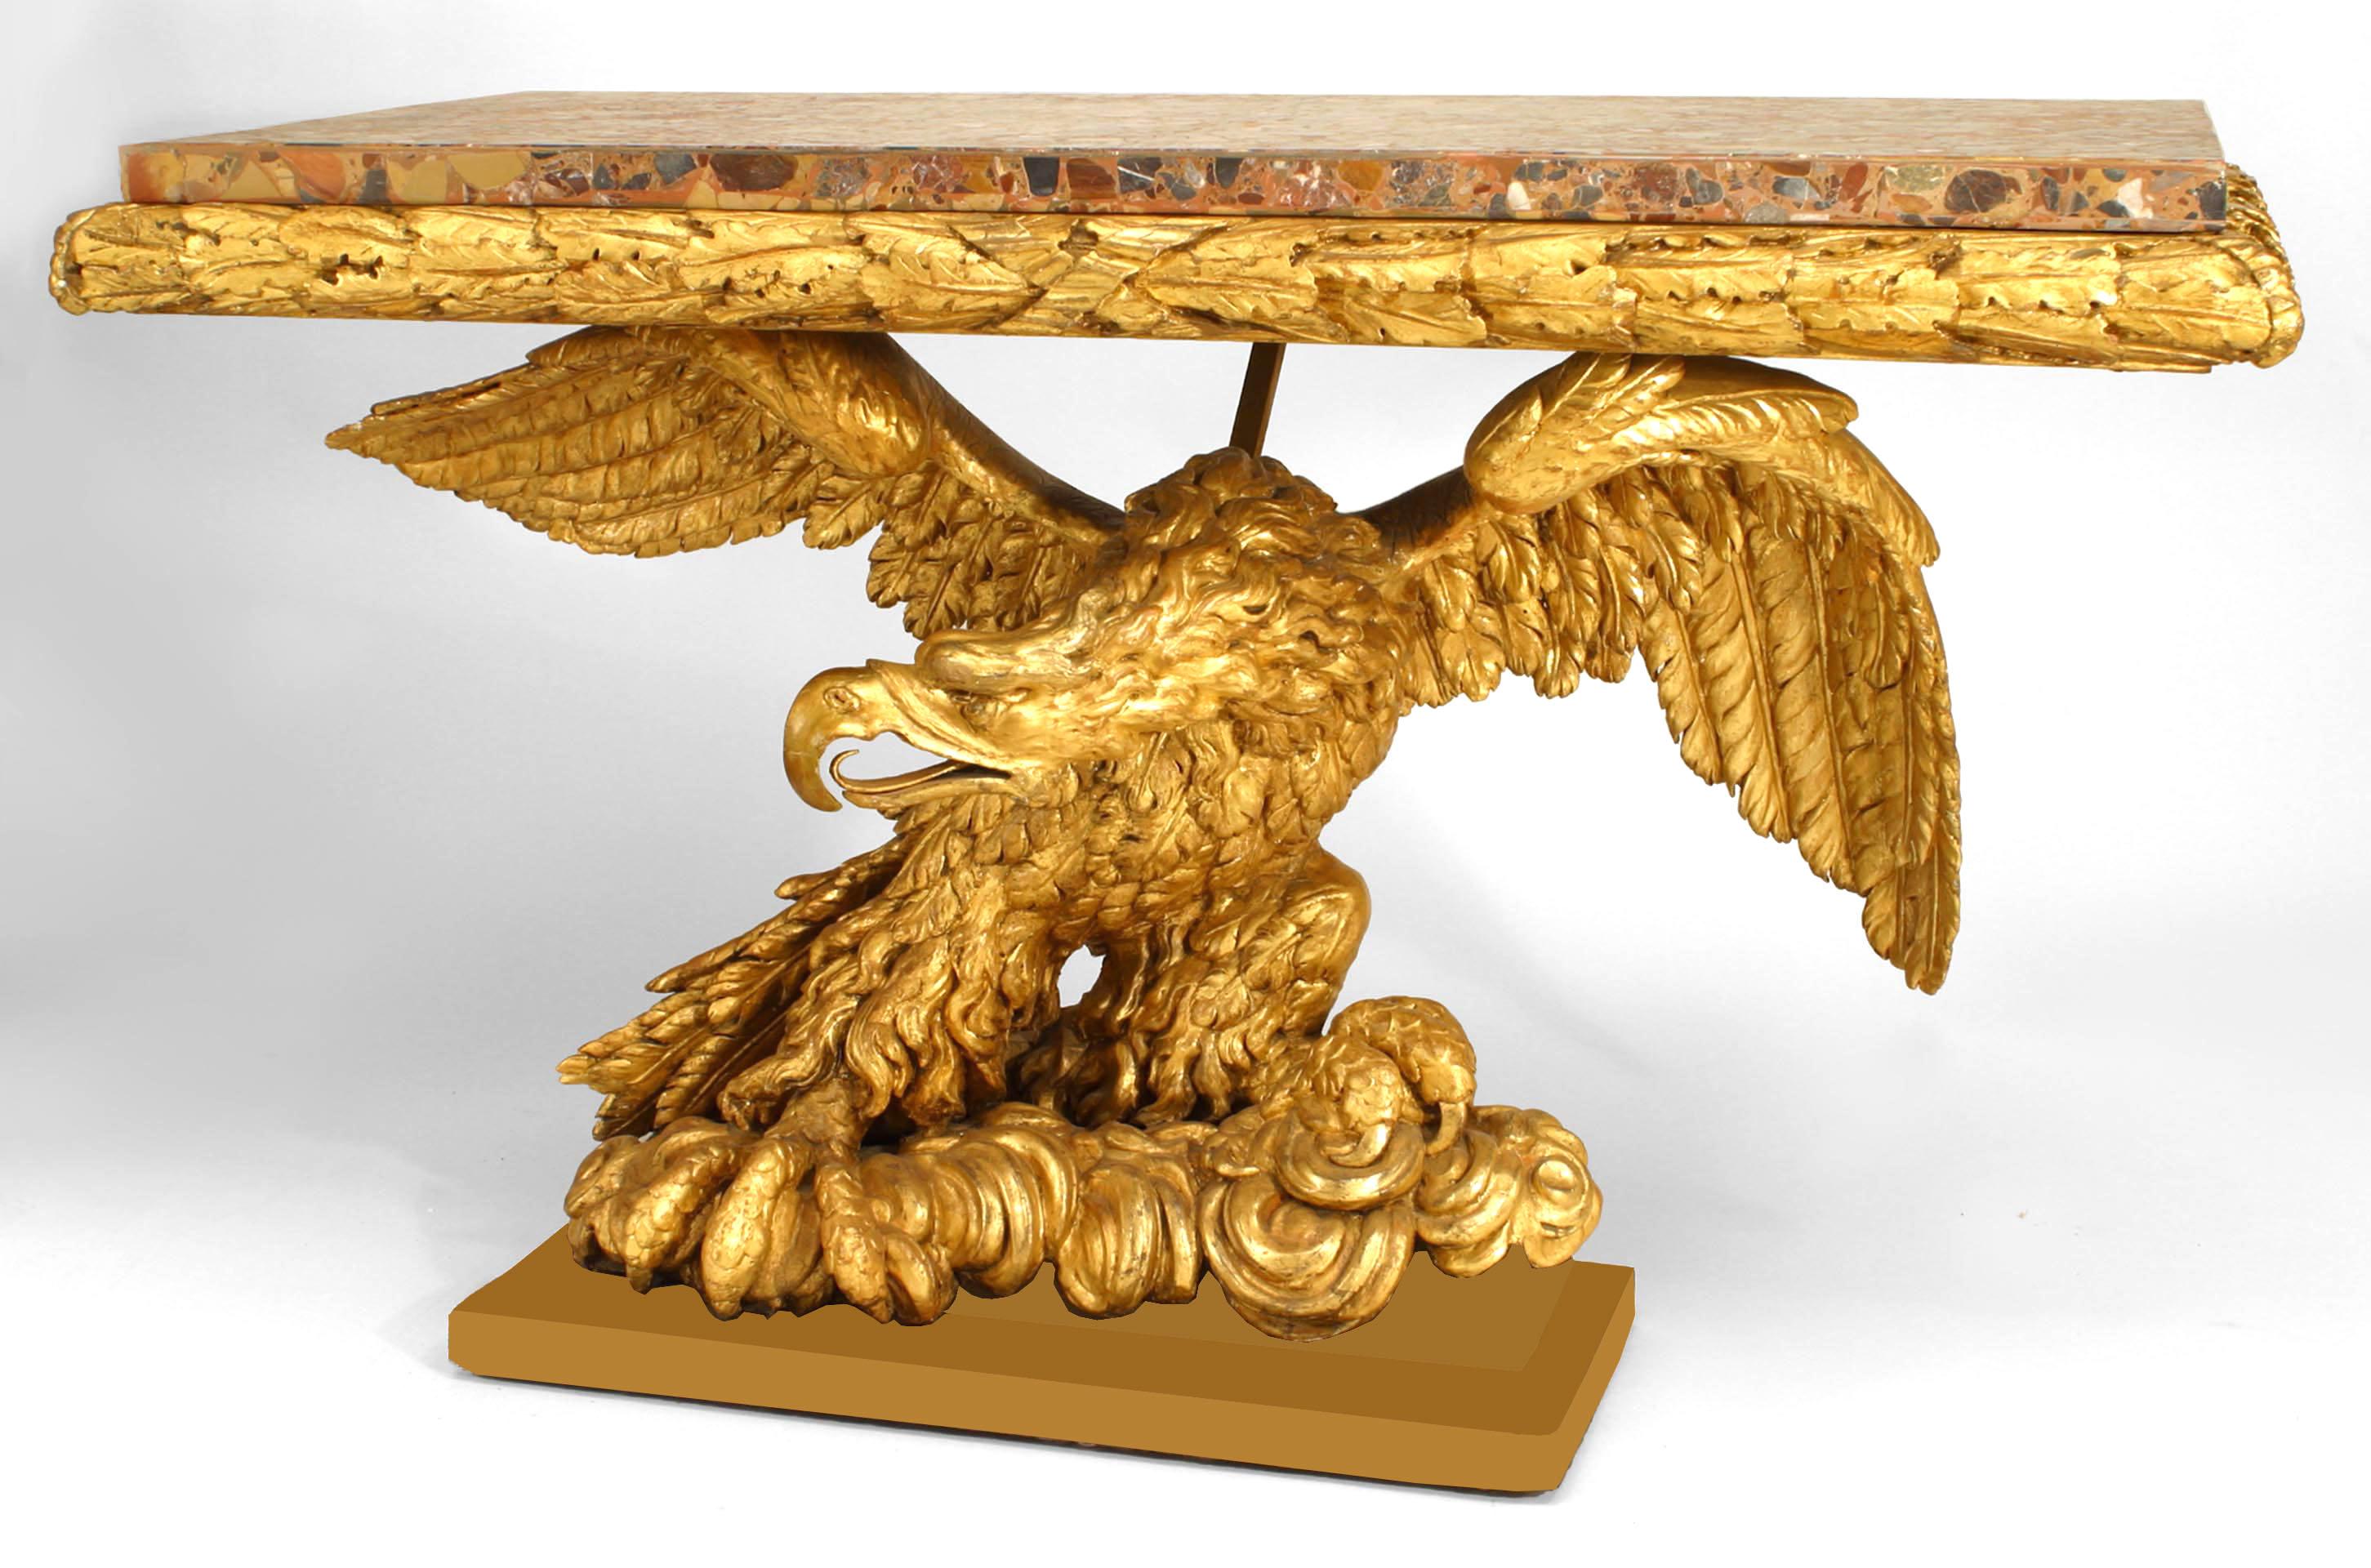 Italian Empire late 18th Century / early 19th Century console table with a variegated marble slab and gilt caved acanthus leaves wooden top supported on a gilt carved base depicting an eagle with outspread wings seated on an ebonized platform.
